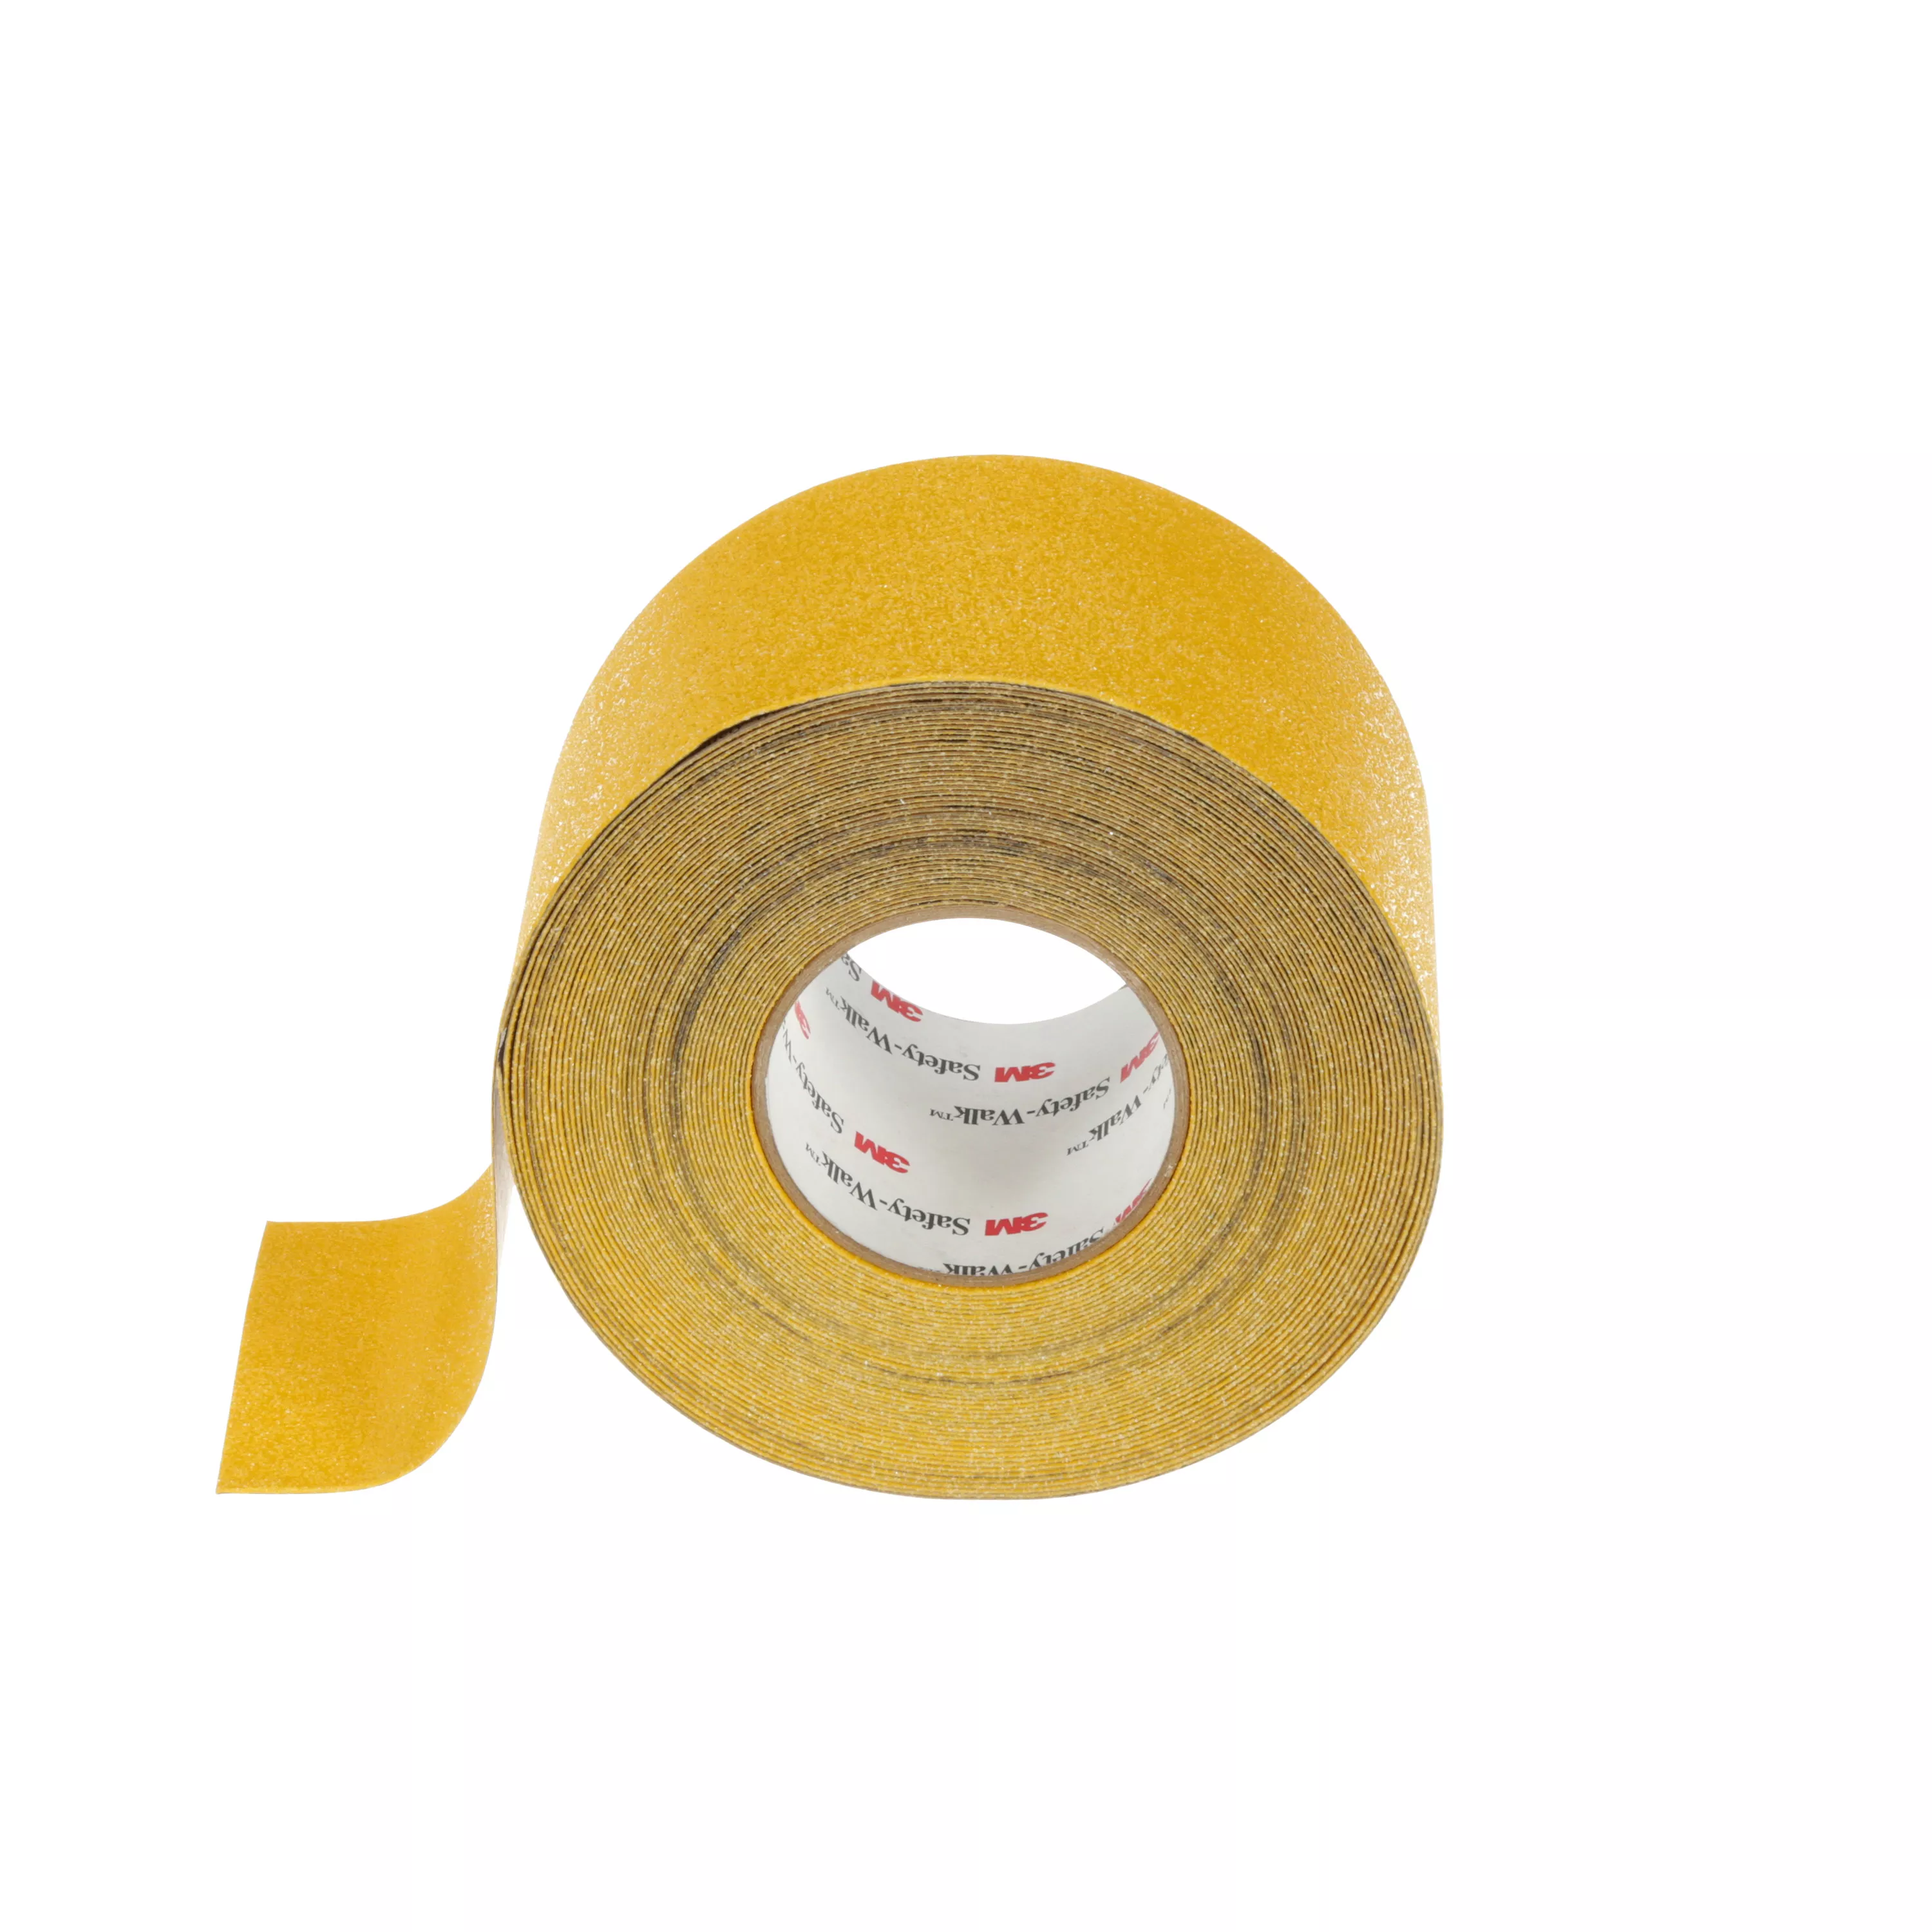 Product Number 530 | 3M™ Safety-Walk™ Slip-Resistant Conformable Tapes & Treads 530